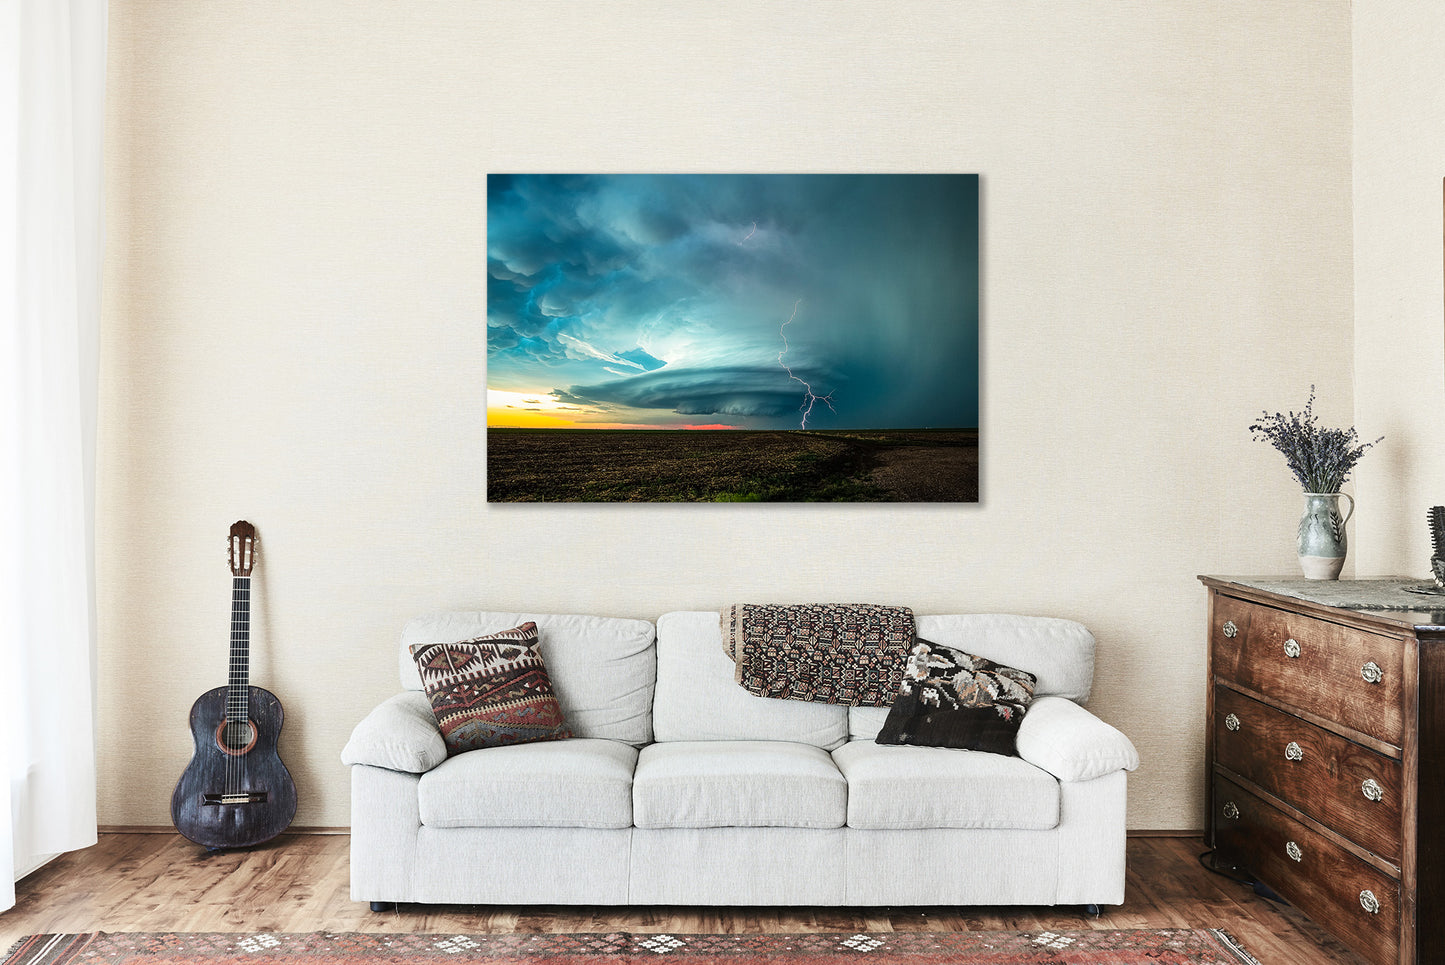 Canvas Wall Art - Gallery Wrap of Supercell Thunderstorm with Lightning at Dusk in Kansas - Storm Photography Artwork Photo Decor